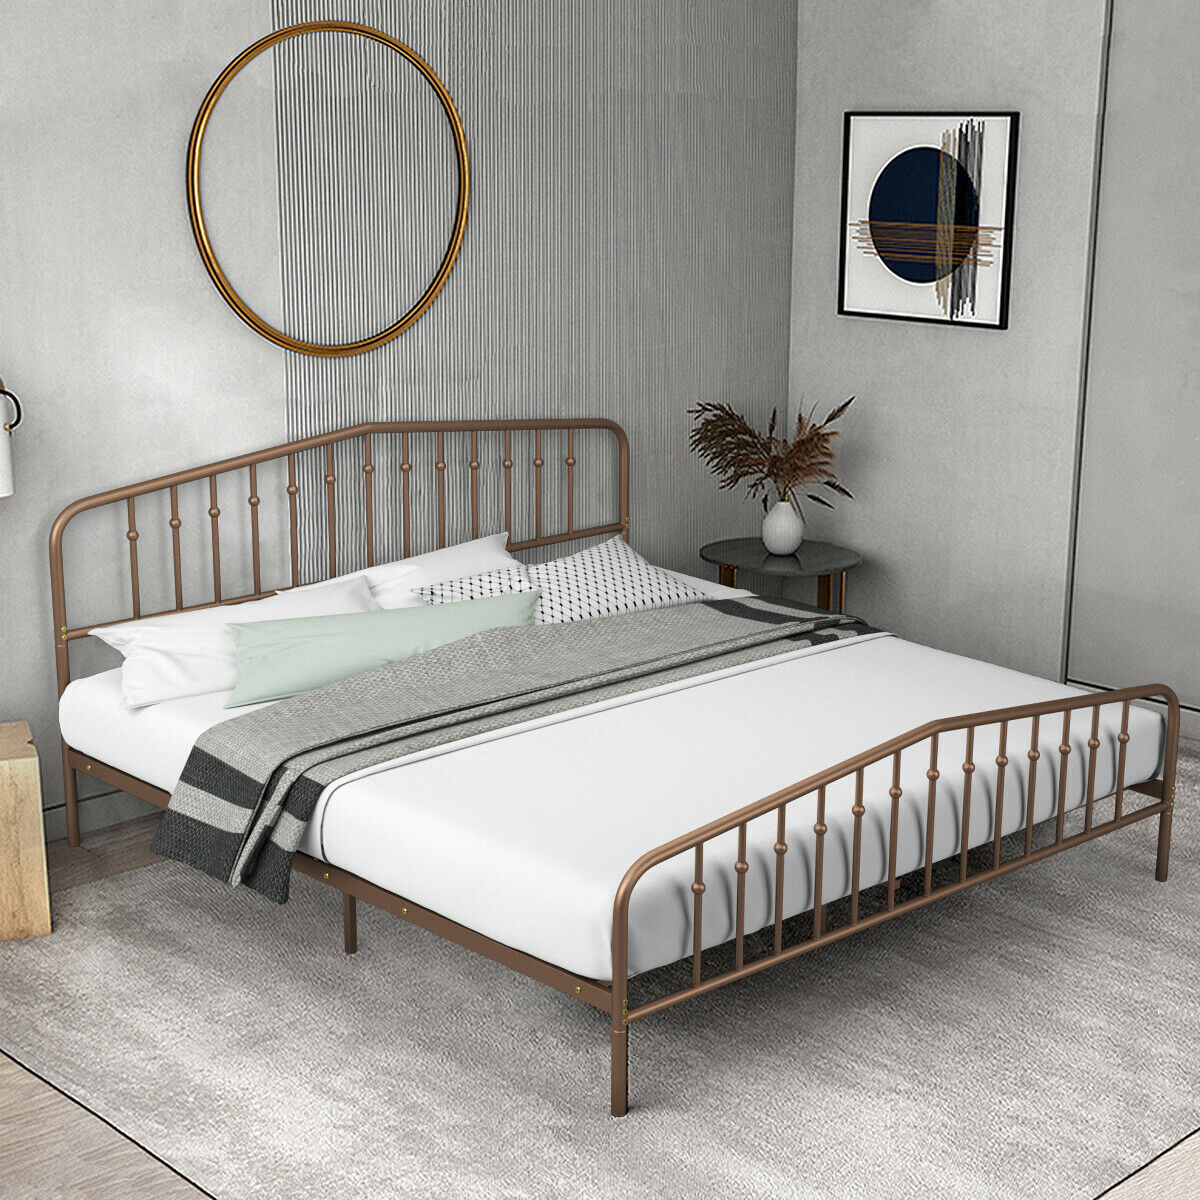 Gymax King Size Metal Bed Frame Steel, King Size Metal Bed Frame With Headboard